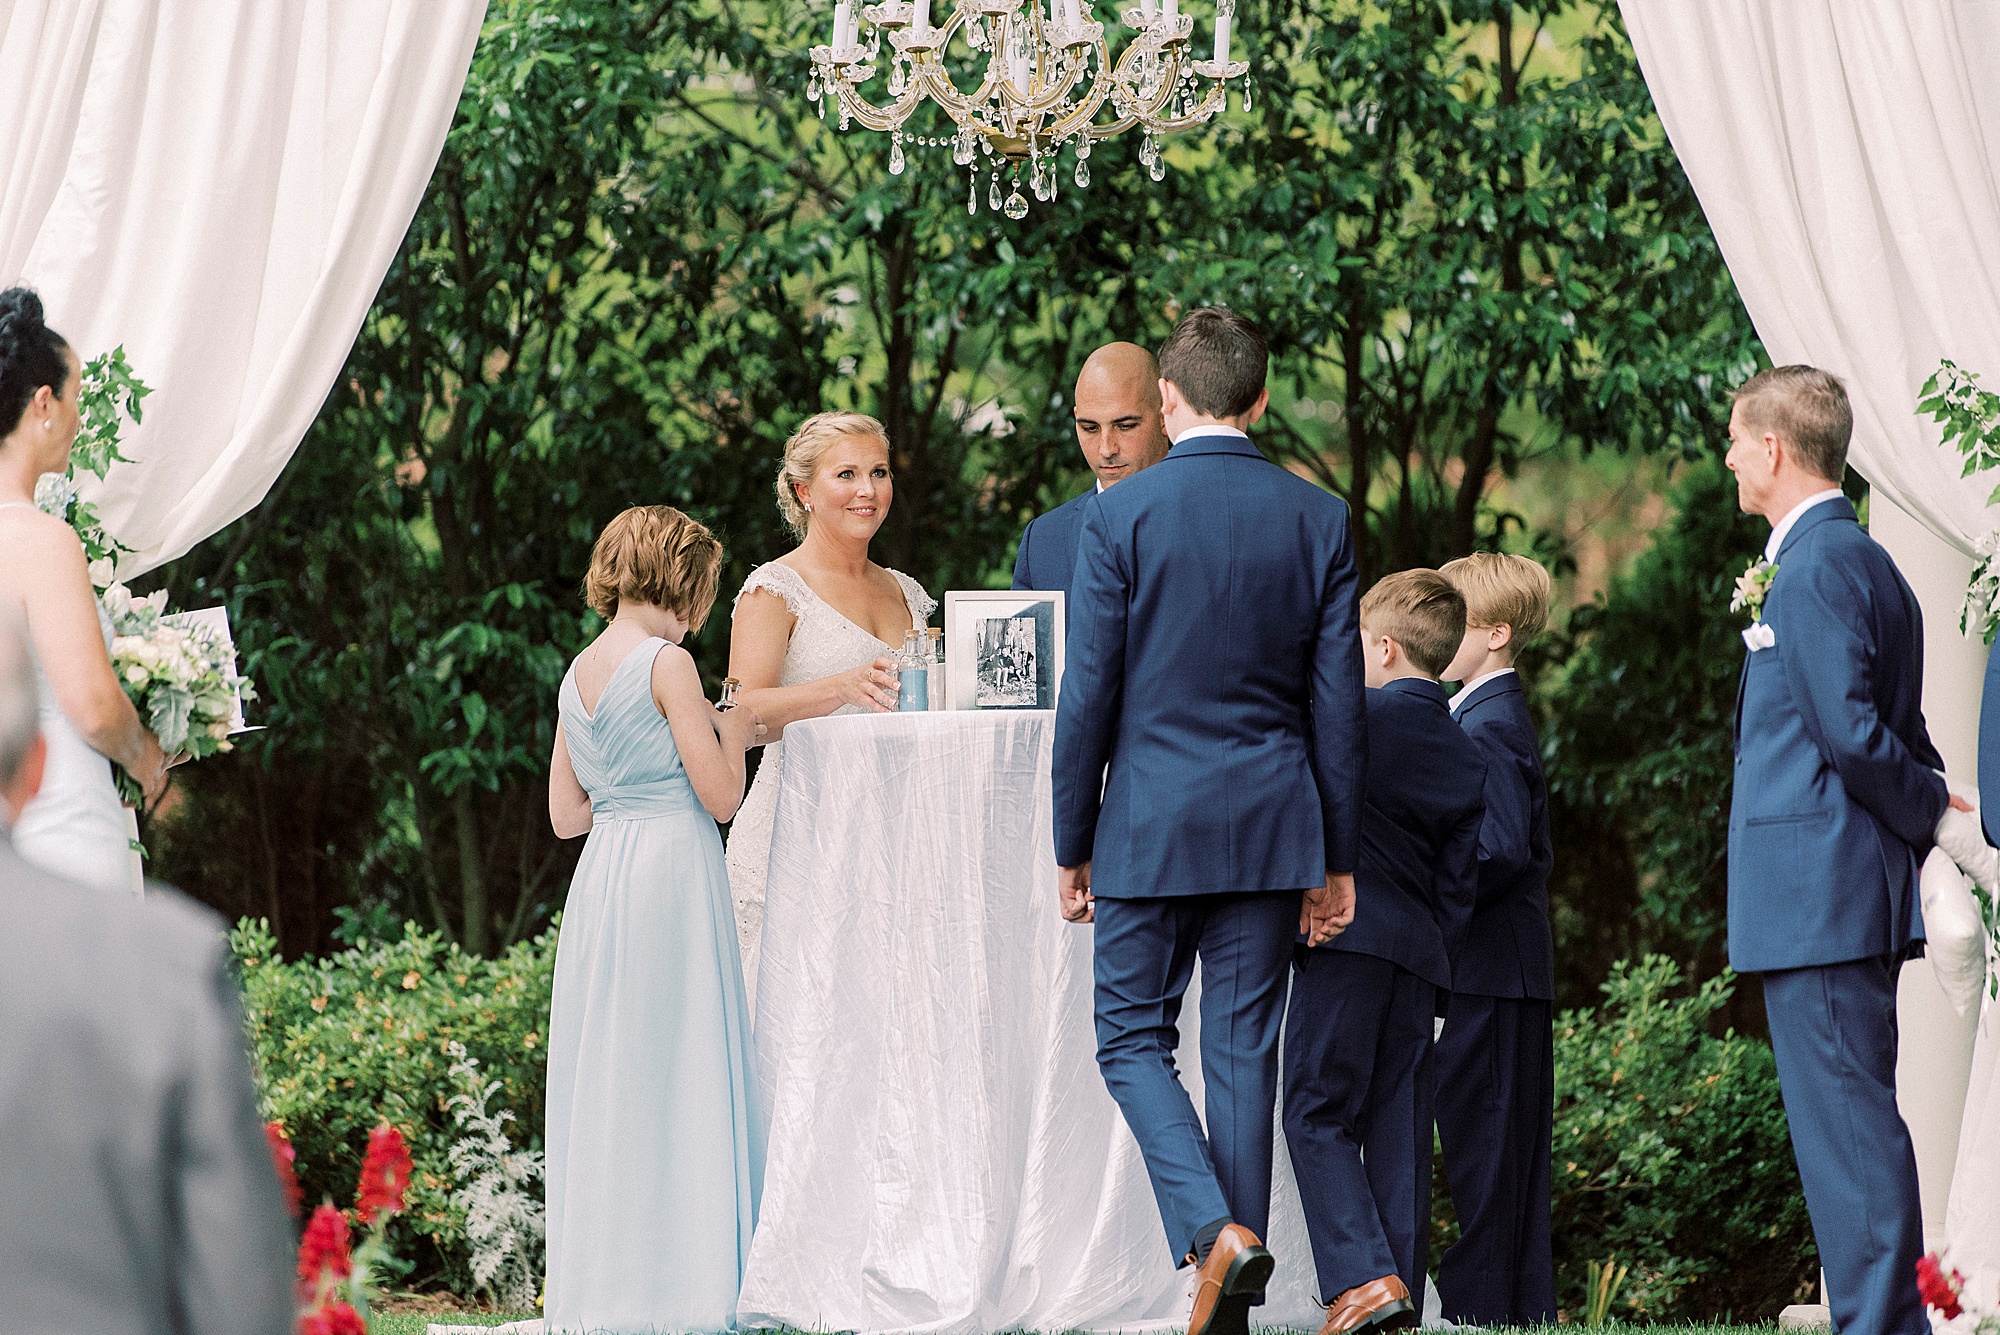 sand ceremony for family during Separk Mansion wedding with kids